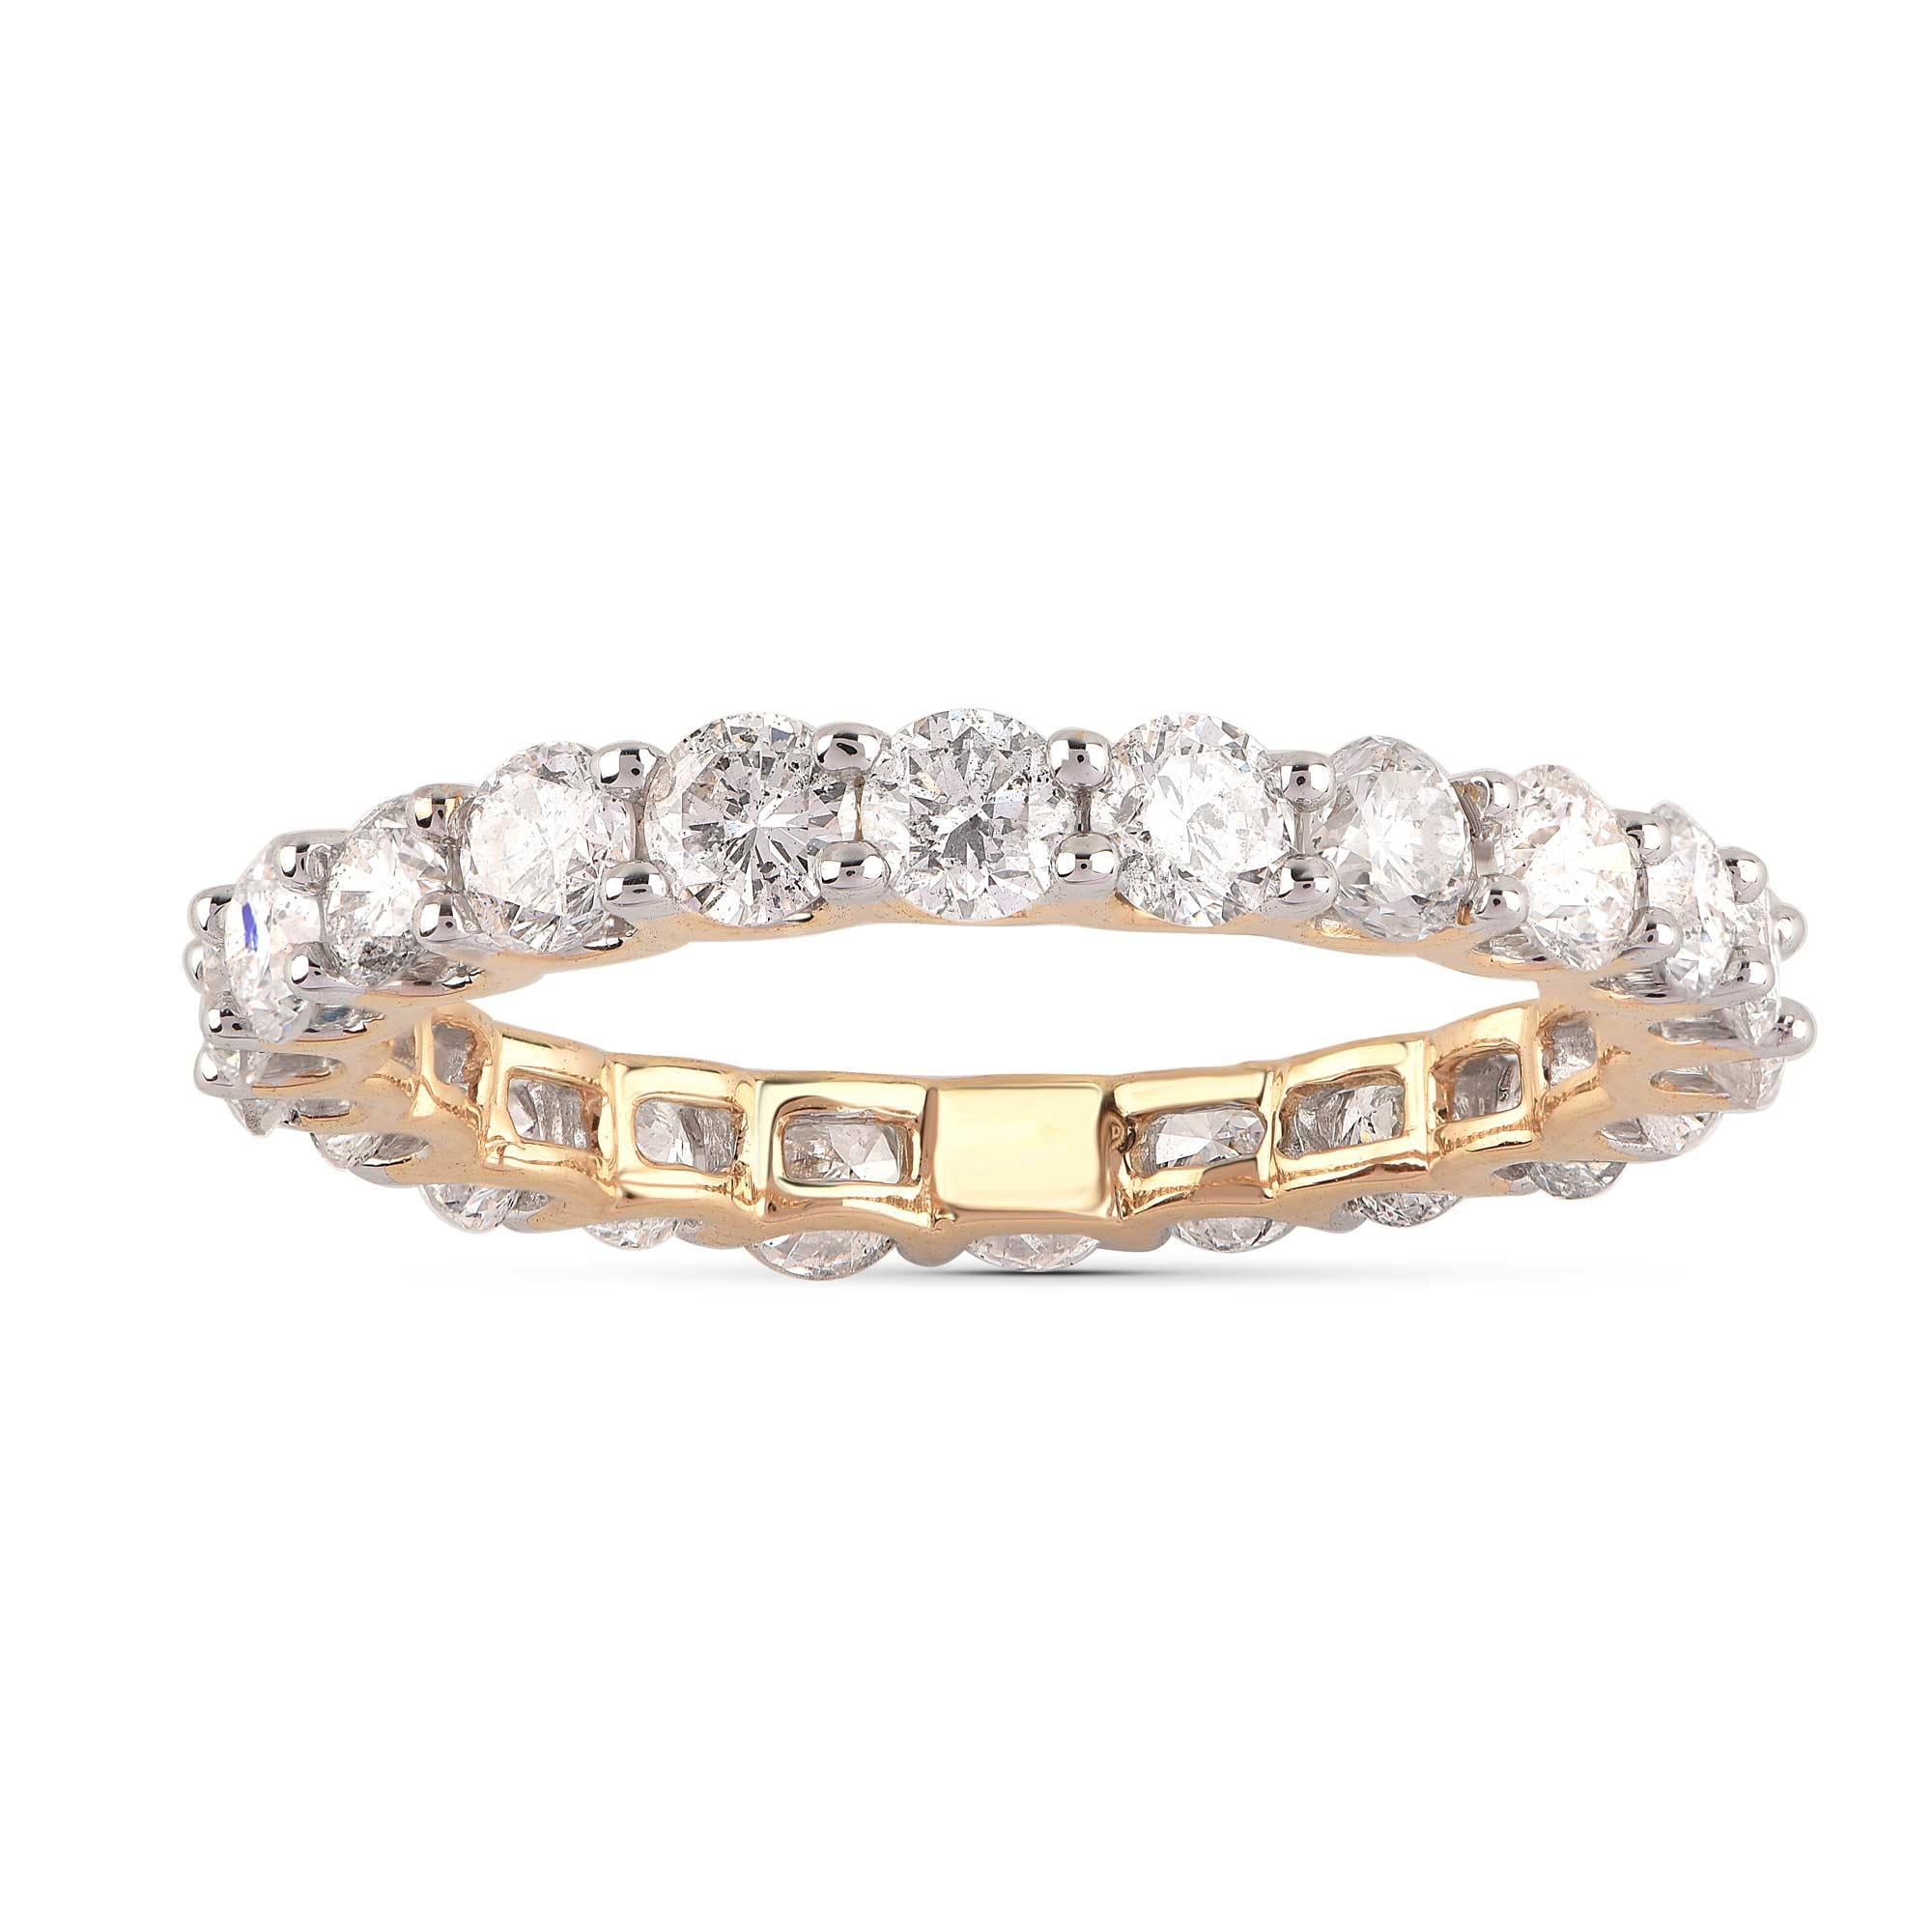 This full eternity wedding band shimmers with 22 brilliant cut diamonds beautifully set in prong setting and crafted in 18-karat yellow gold. The diamonds are graded H-I Color, I2 Clarity. 

Metal color and ring size can be customized on request.